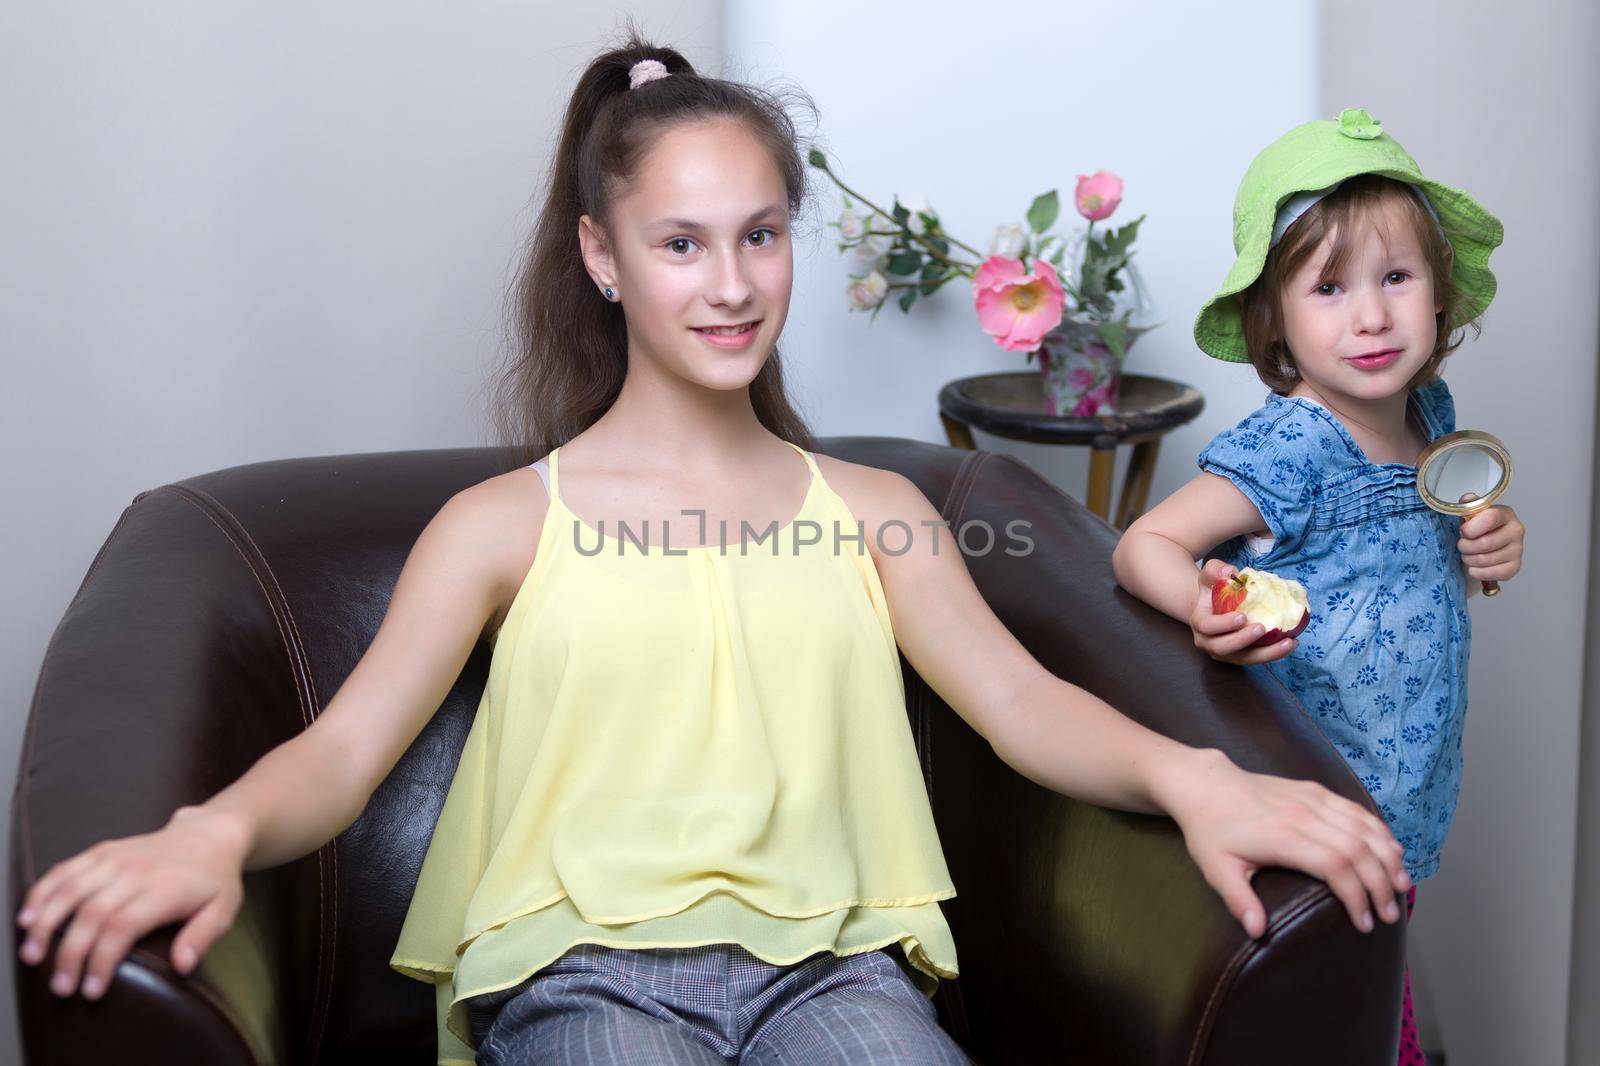 Two older and younger girls, two sisters fun posing in the studio. The concept of family, friendship.